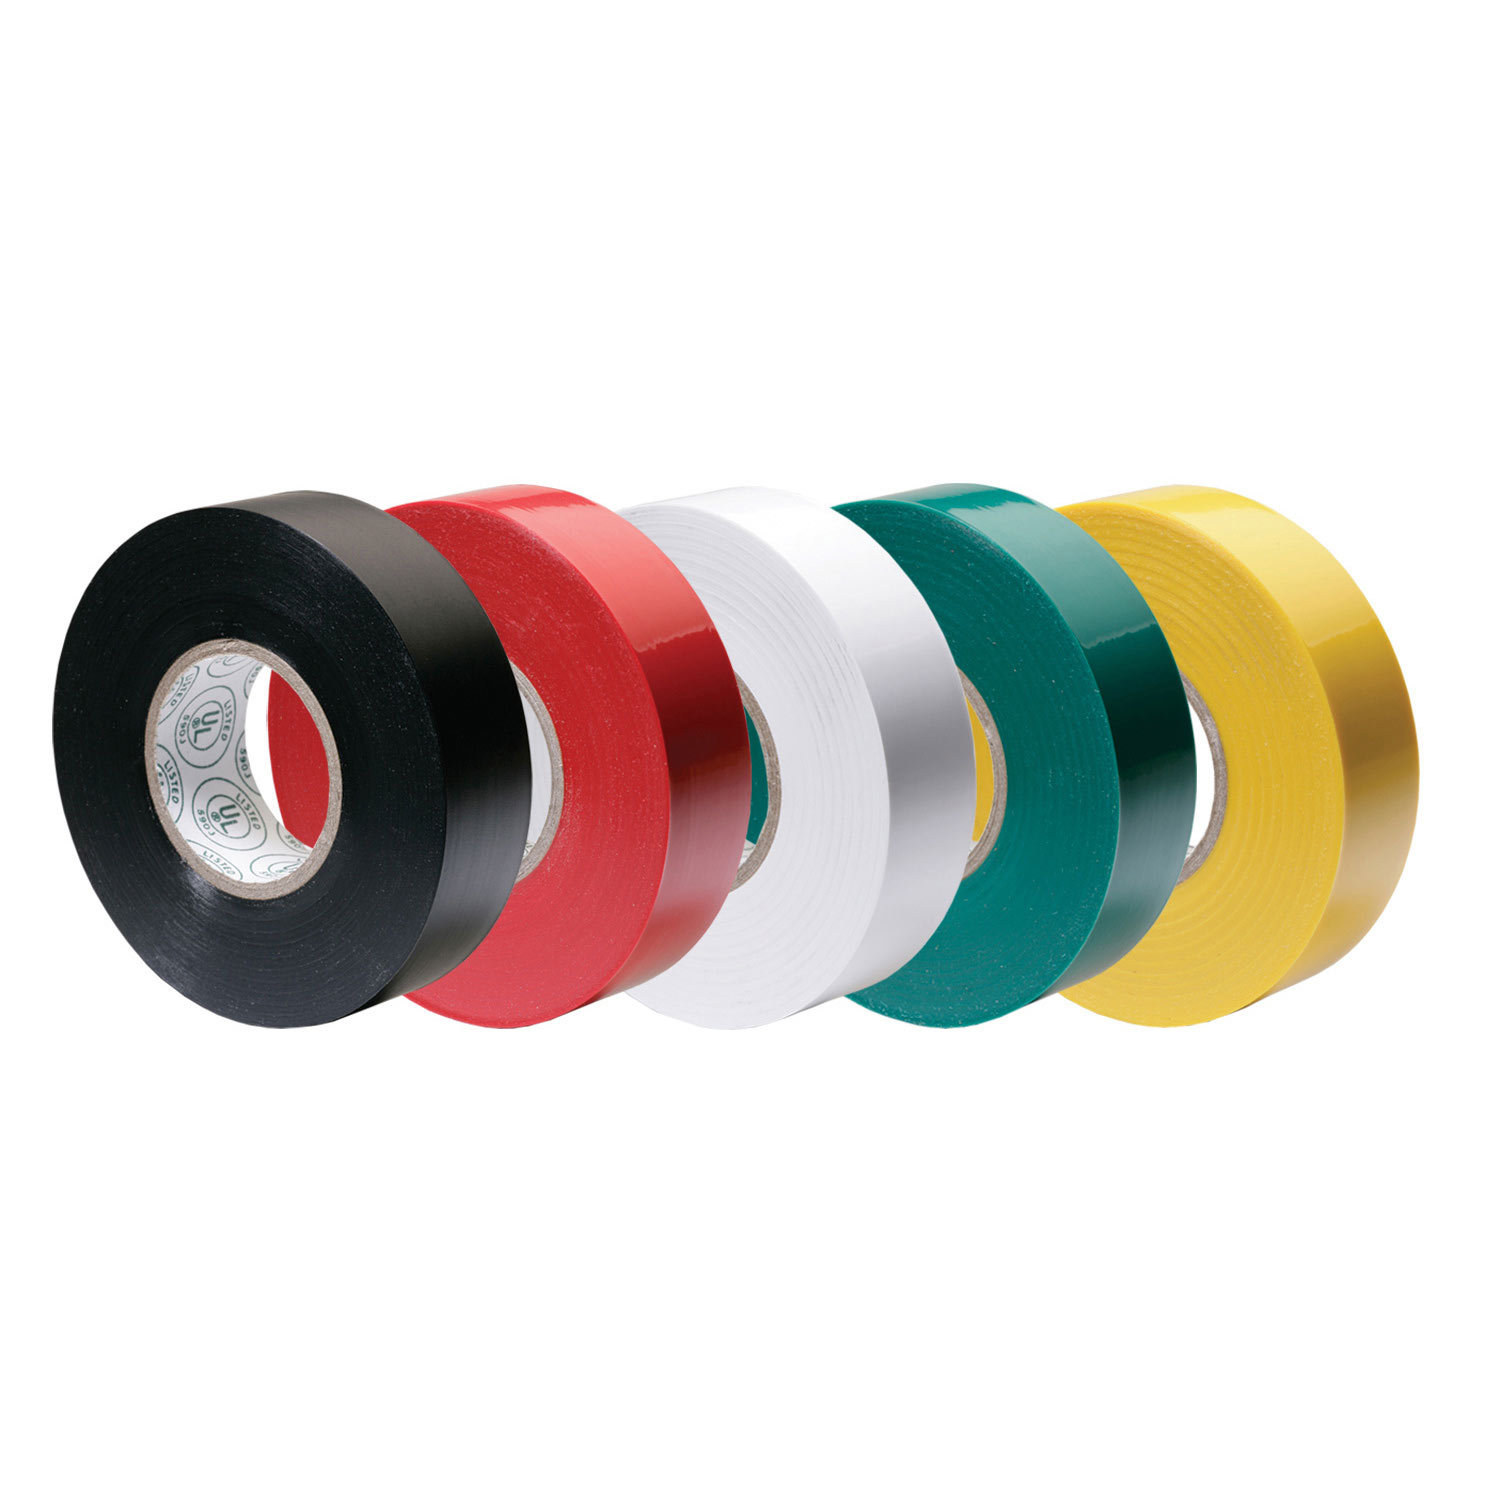 Buy PVC Electrical Insulation Tape 25 Meter Assorted Color (70 Pcs)